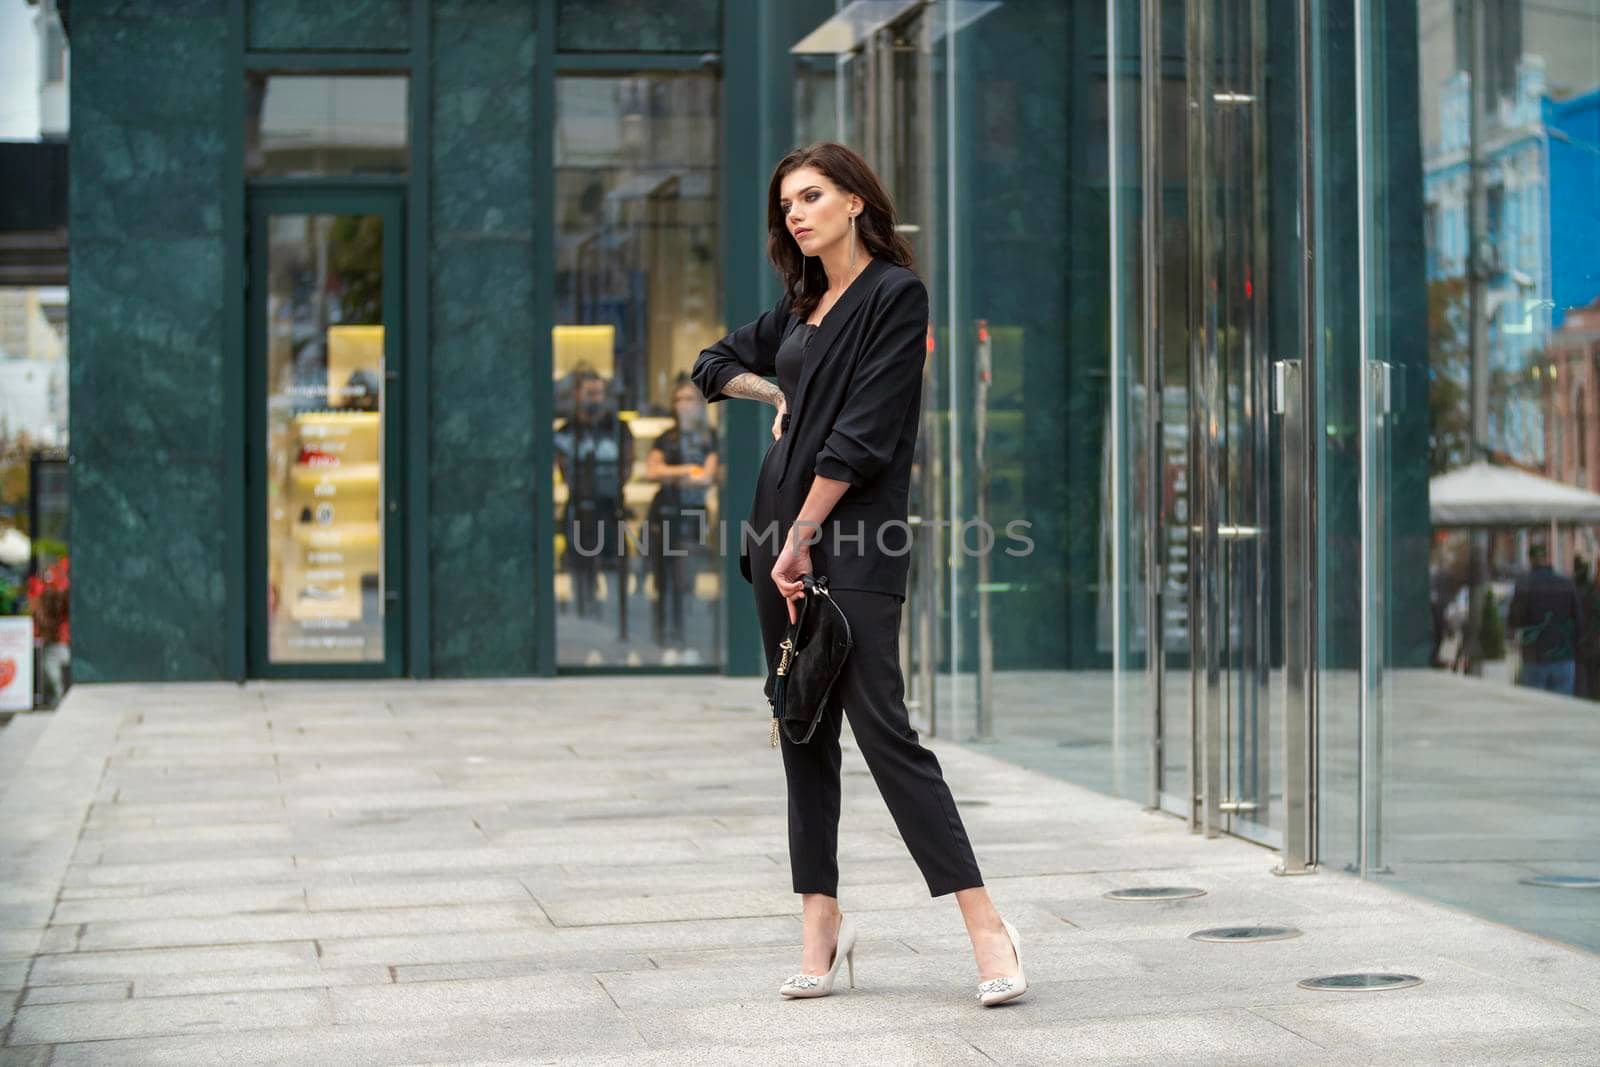 woman in a business suit walking through the city